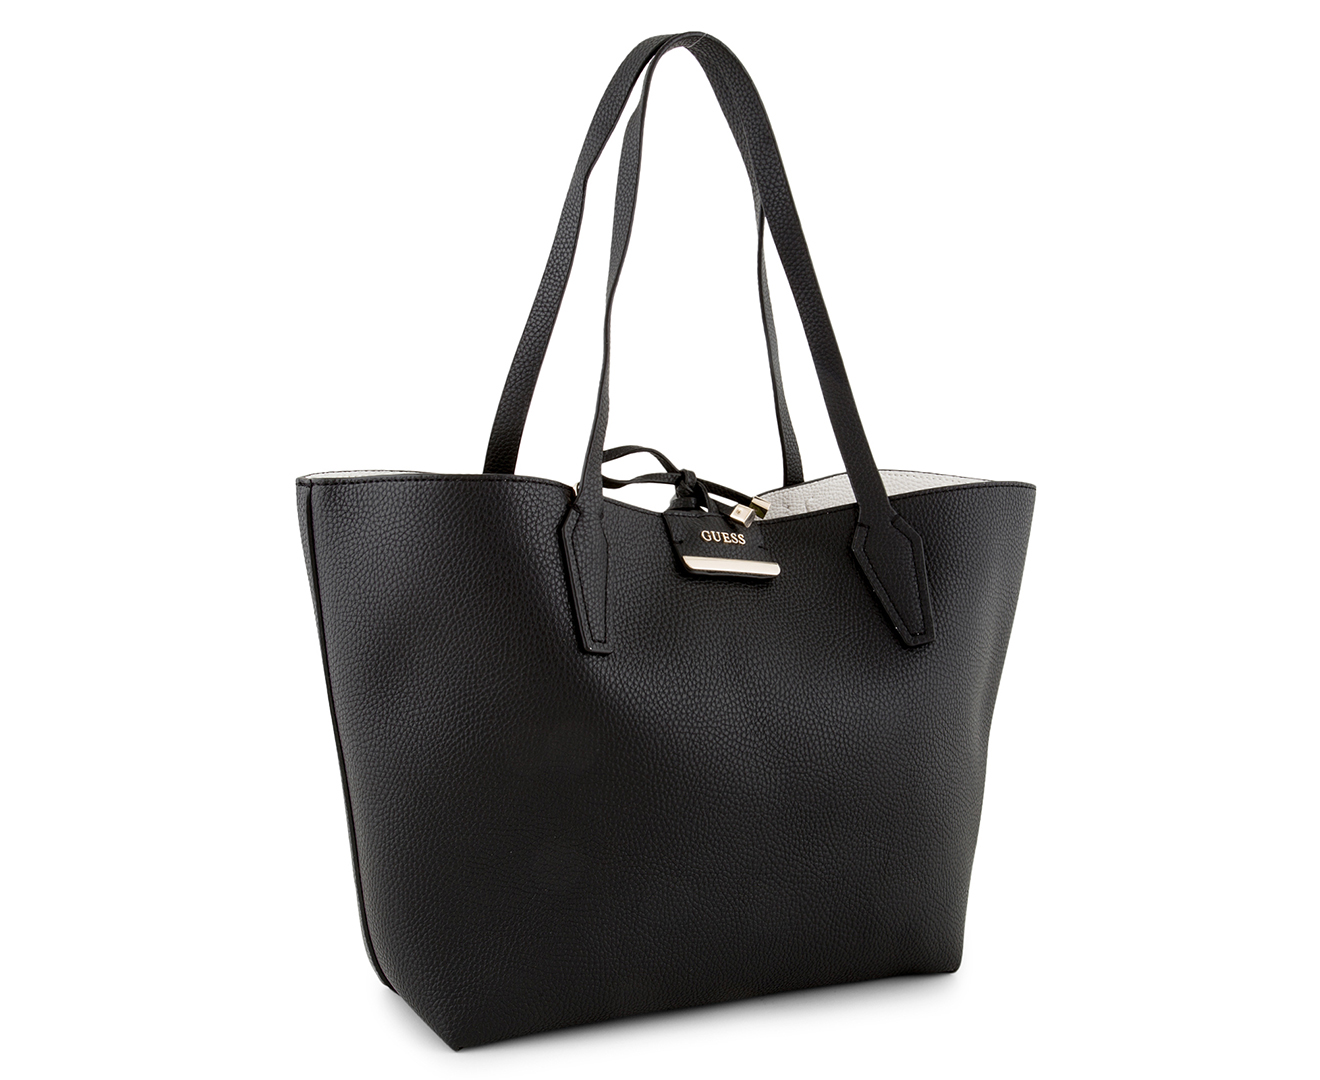 GUESS Bobbi Inside Out Reversible Tote - Black/White | Catch.co.nz